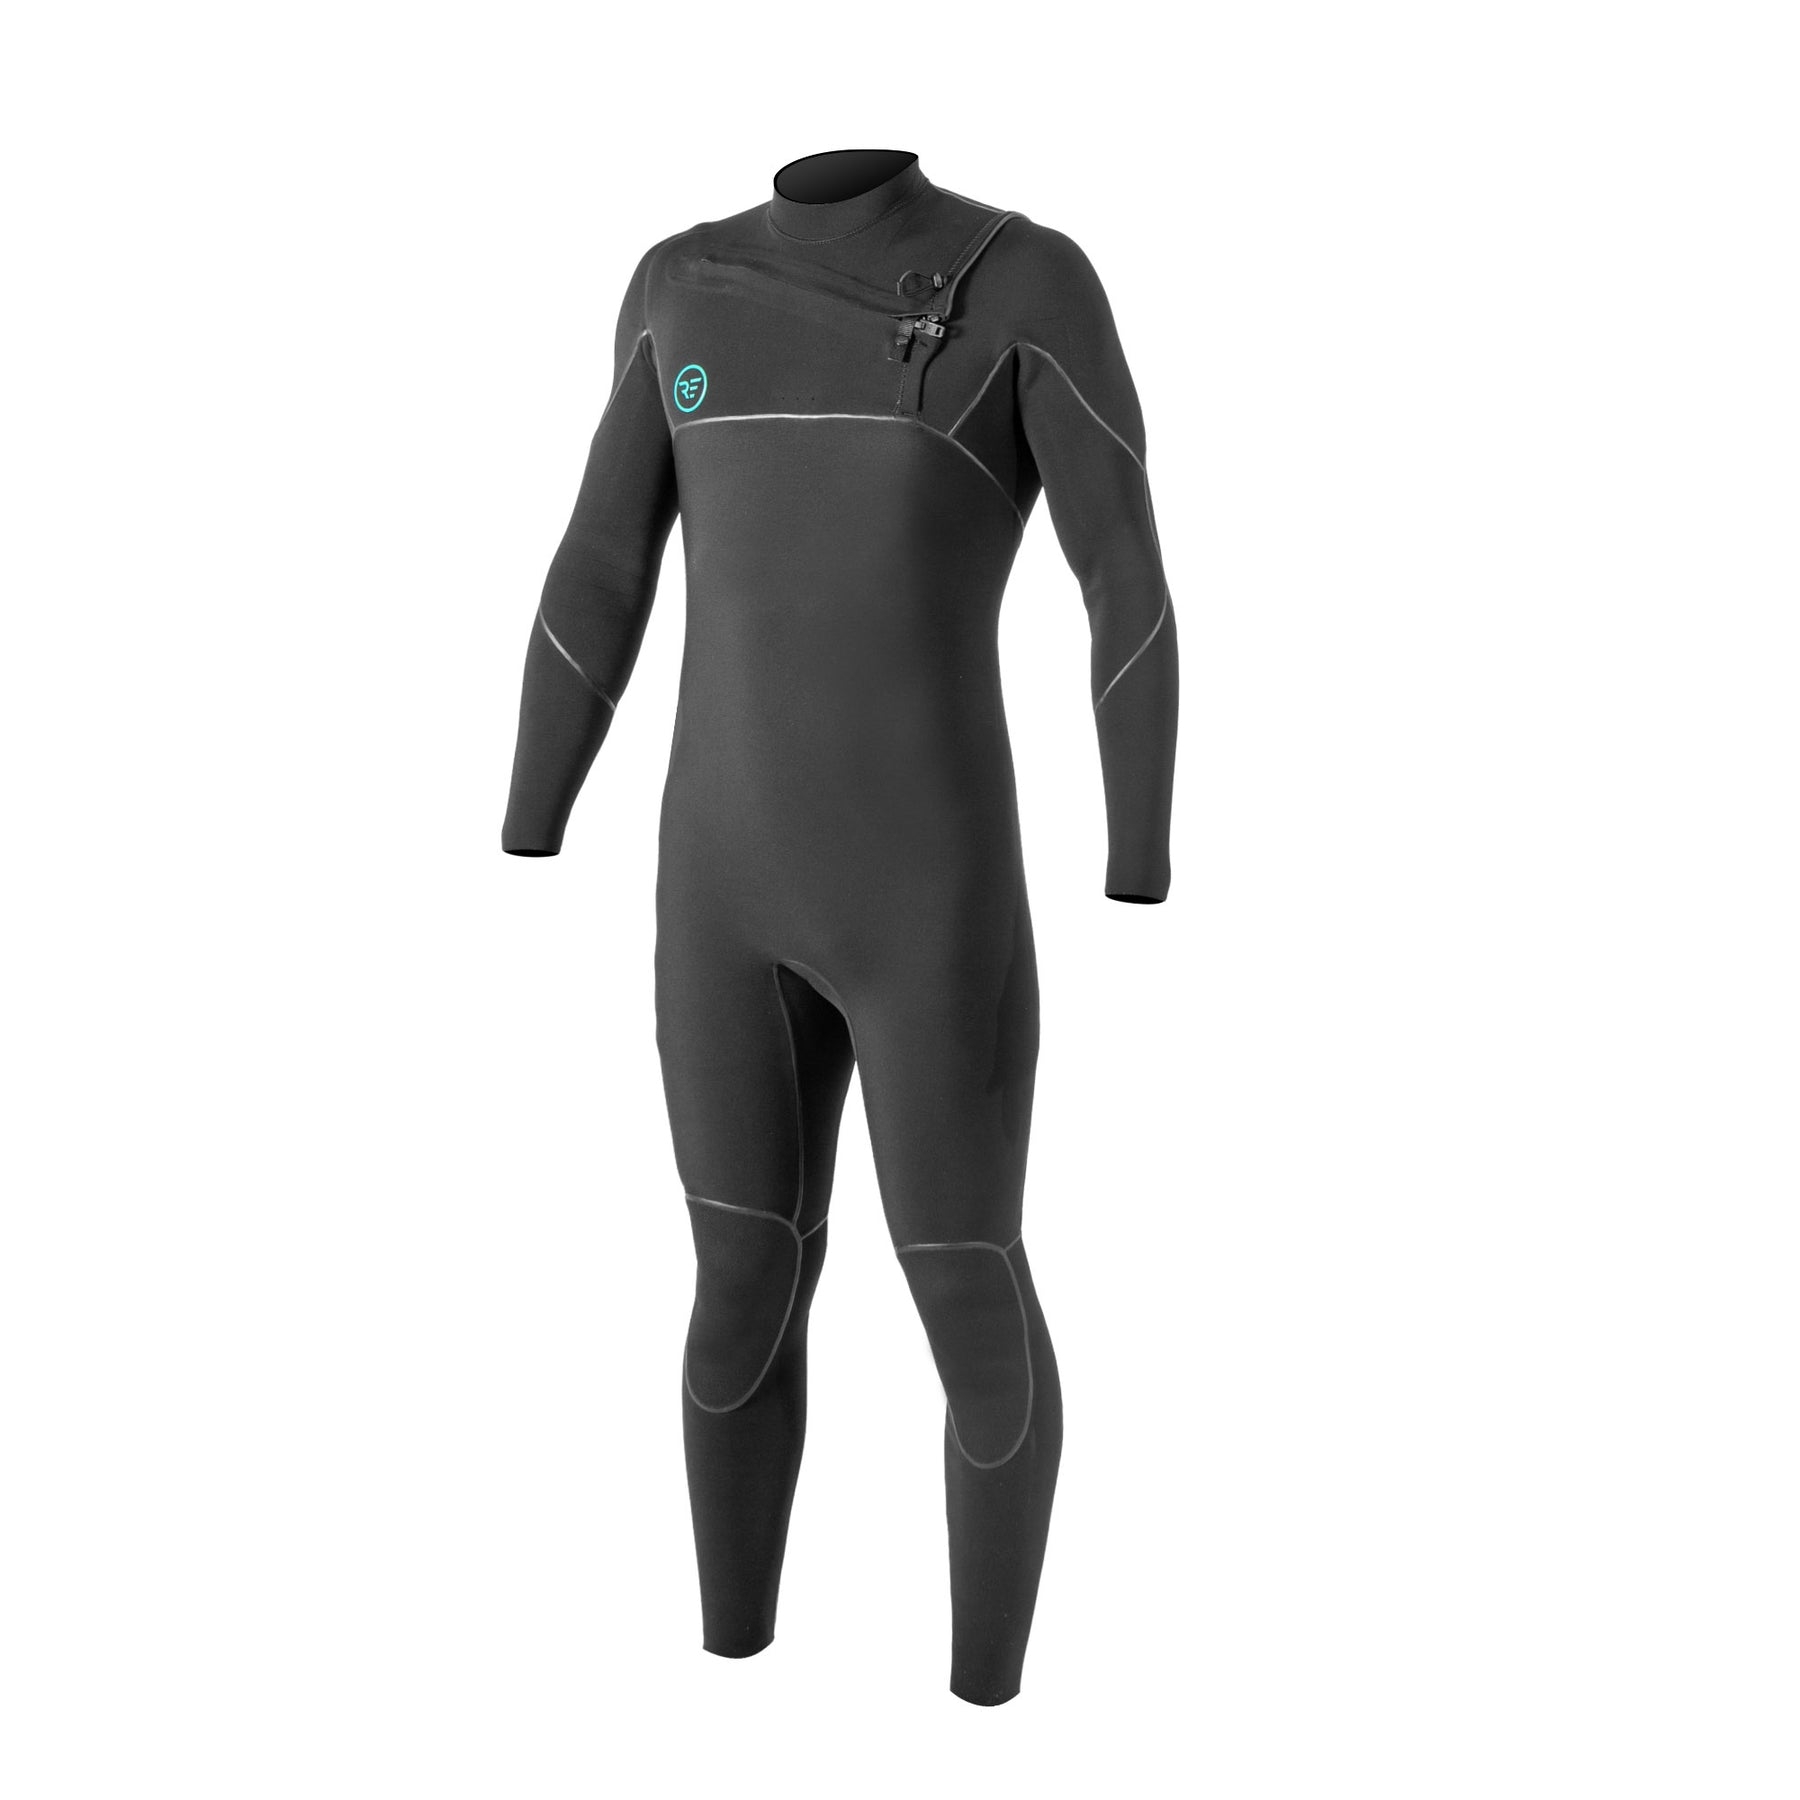 Ride Engine Apoc 3/2 FZ Wetsuit – LT – The Foiling Collective